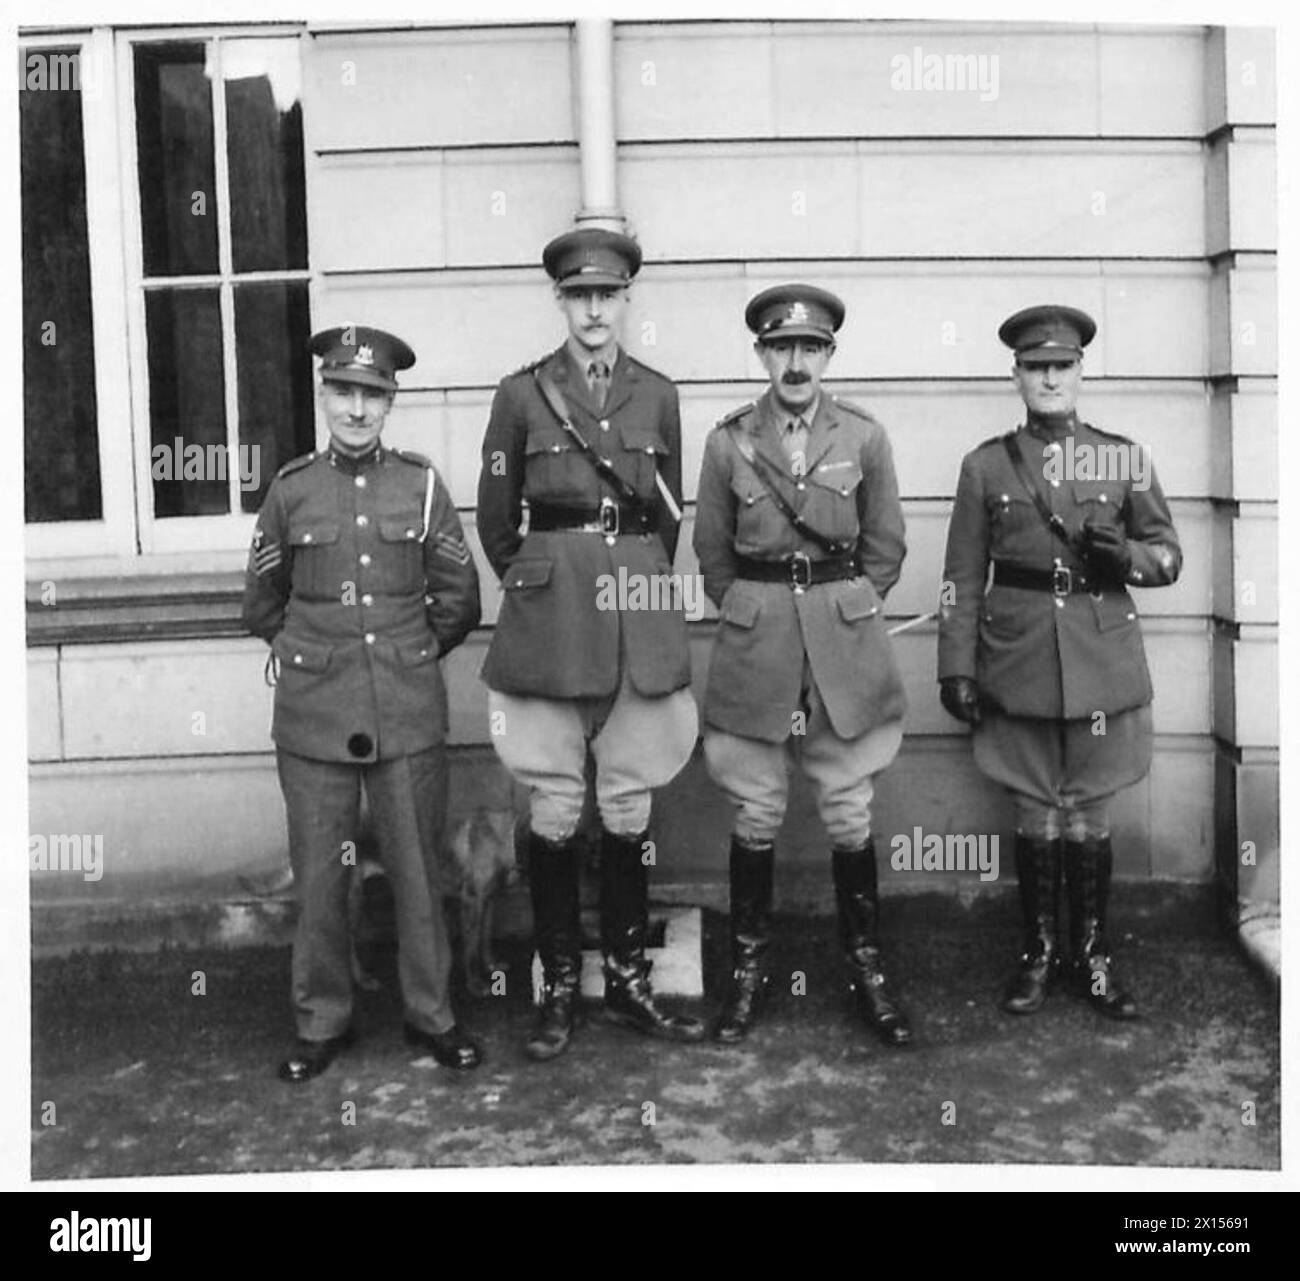 SCOTTISH CAVALRY TRAINING SCHOOL - Some of the staff at the school. Left to right: Sergeant L.E. Tullet, Captain C. York (Adjt), Colonel V.N. Lockett (C.O.) and R.S.M. W.J. Riley British Army Stock Photo